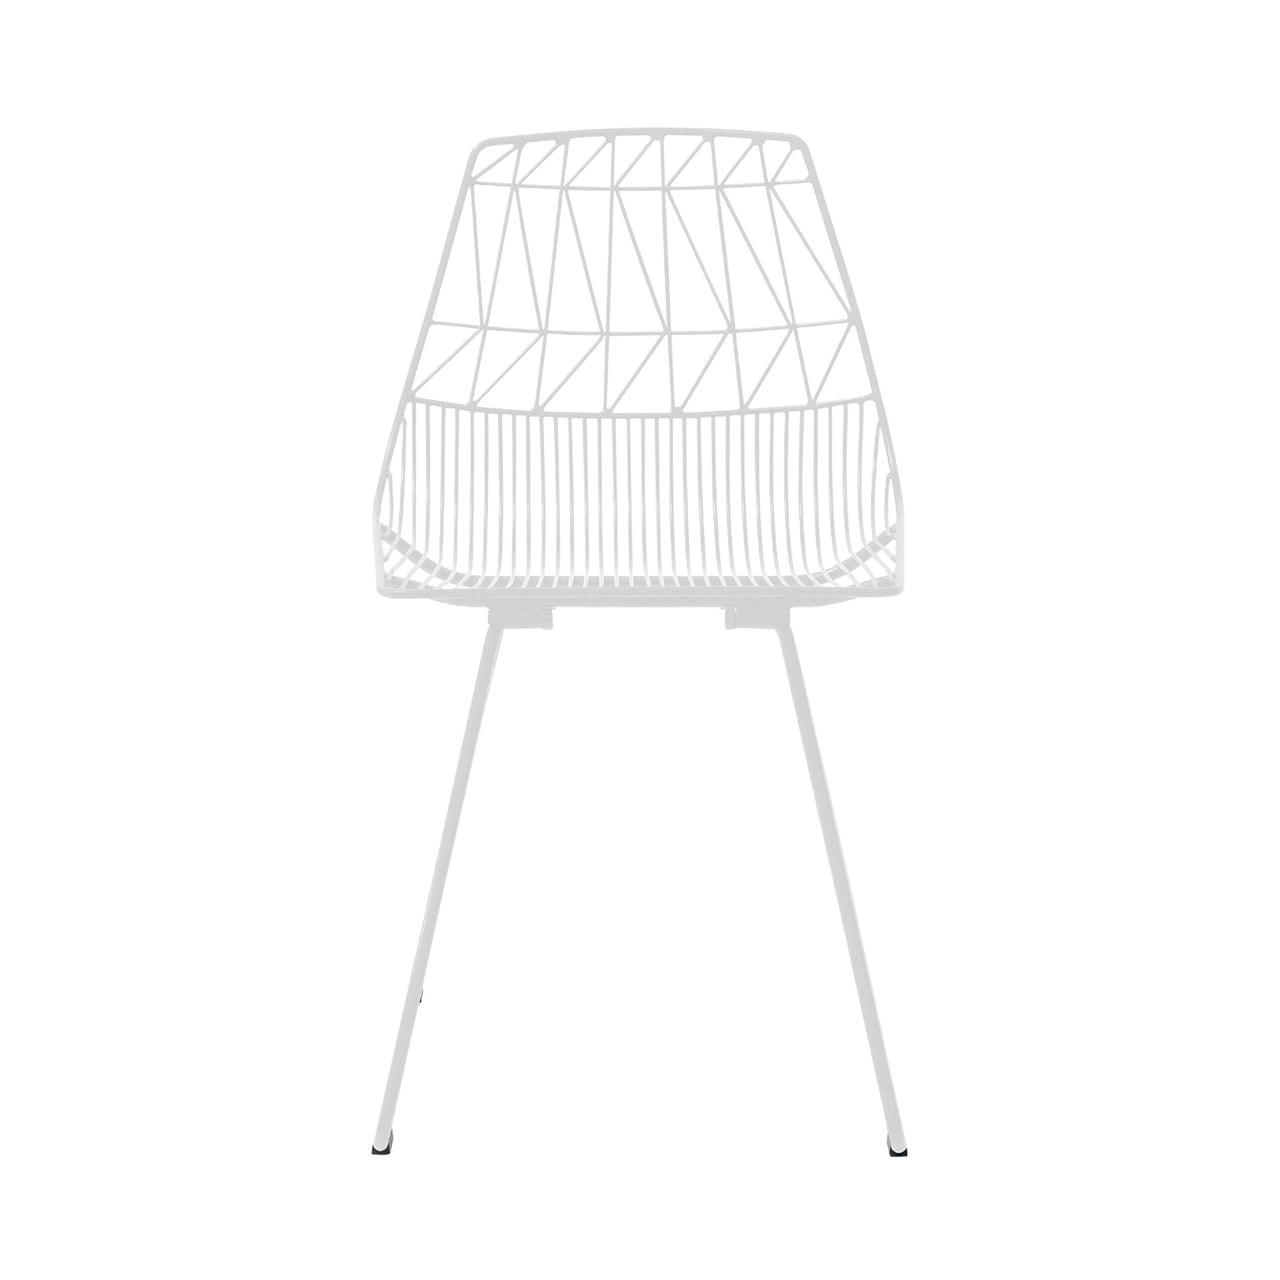 Lucy Chair: Color + White + Without Seat Pad